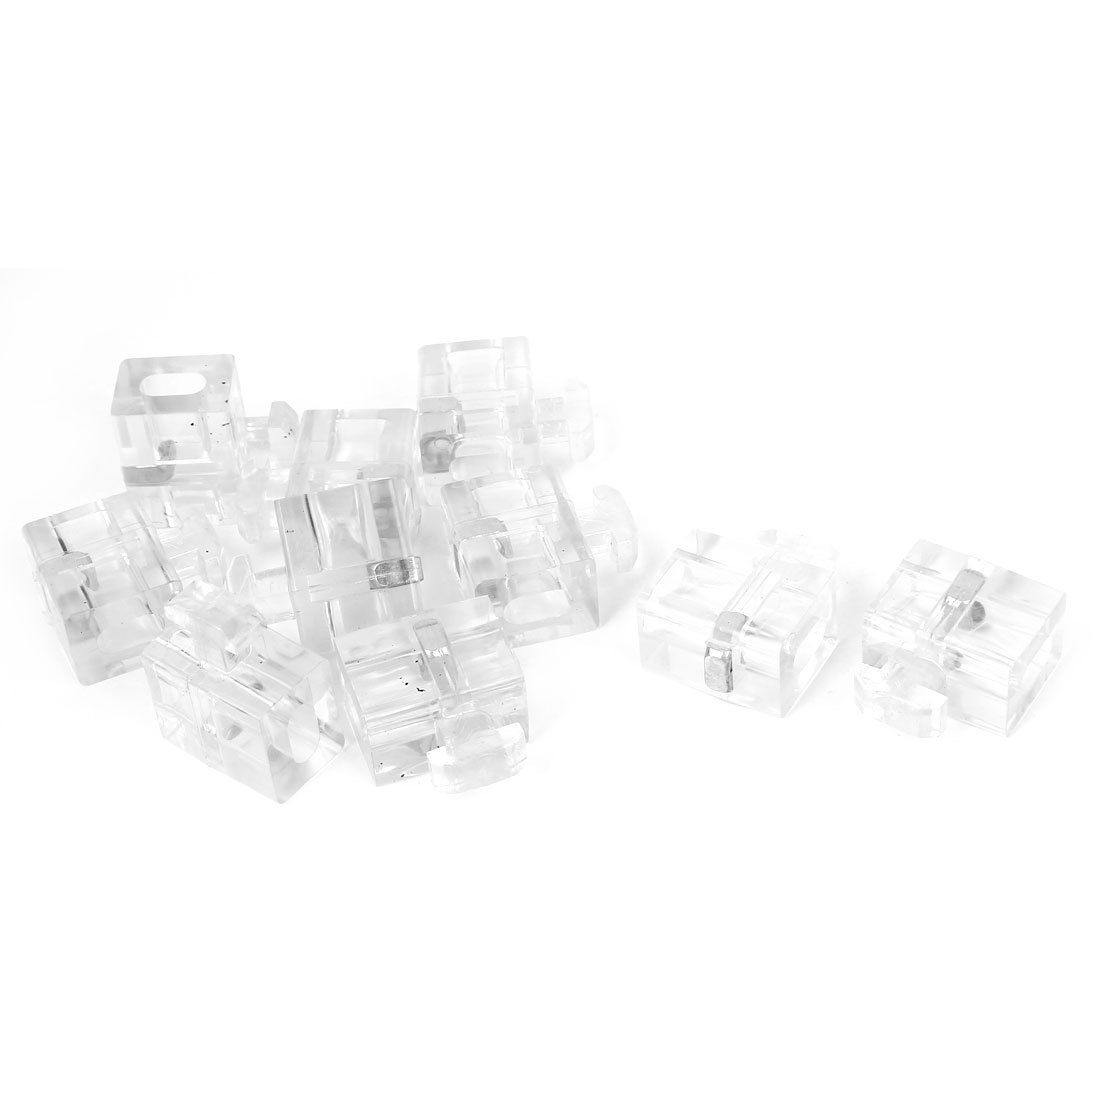 30 Series Aluminium fittings Spacer Partitions Glass connection block type B -Pack of 1 - Extrusion and CNC